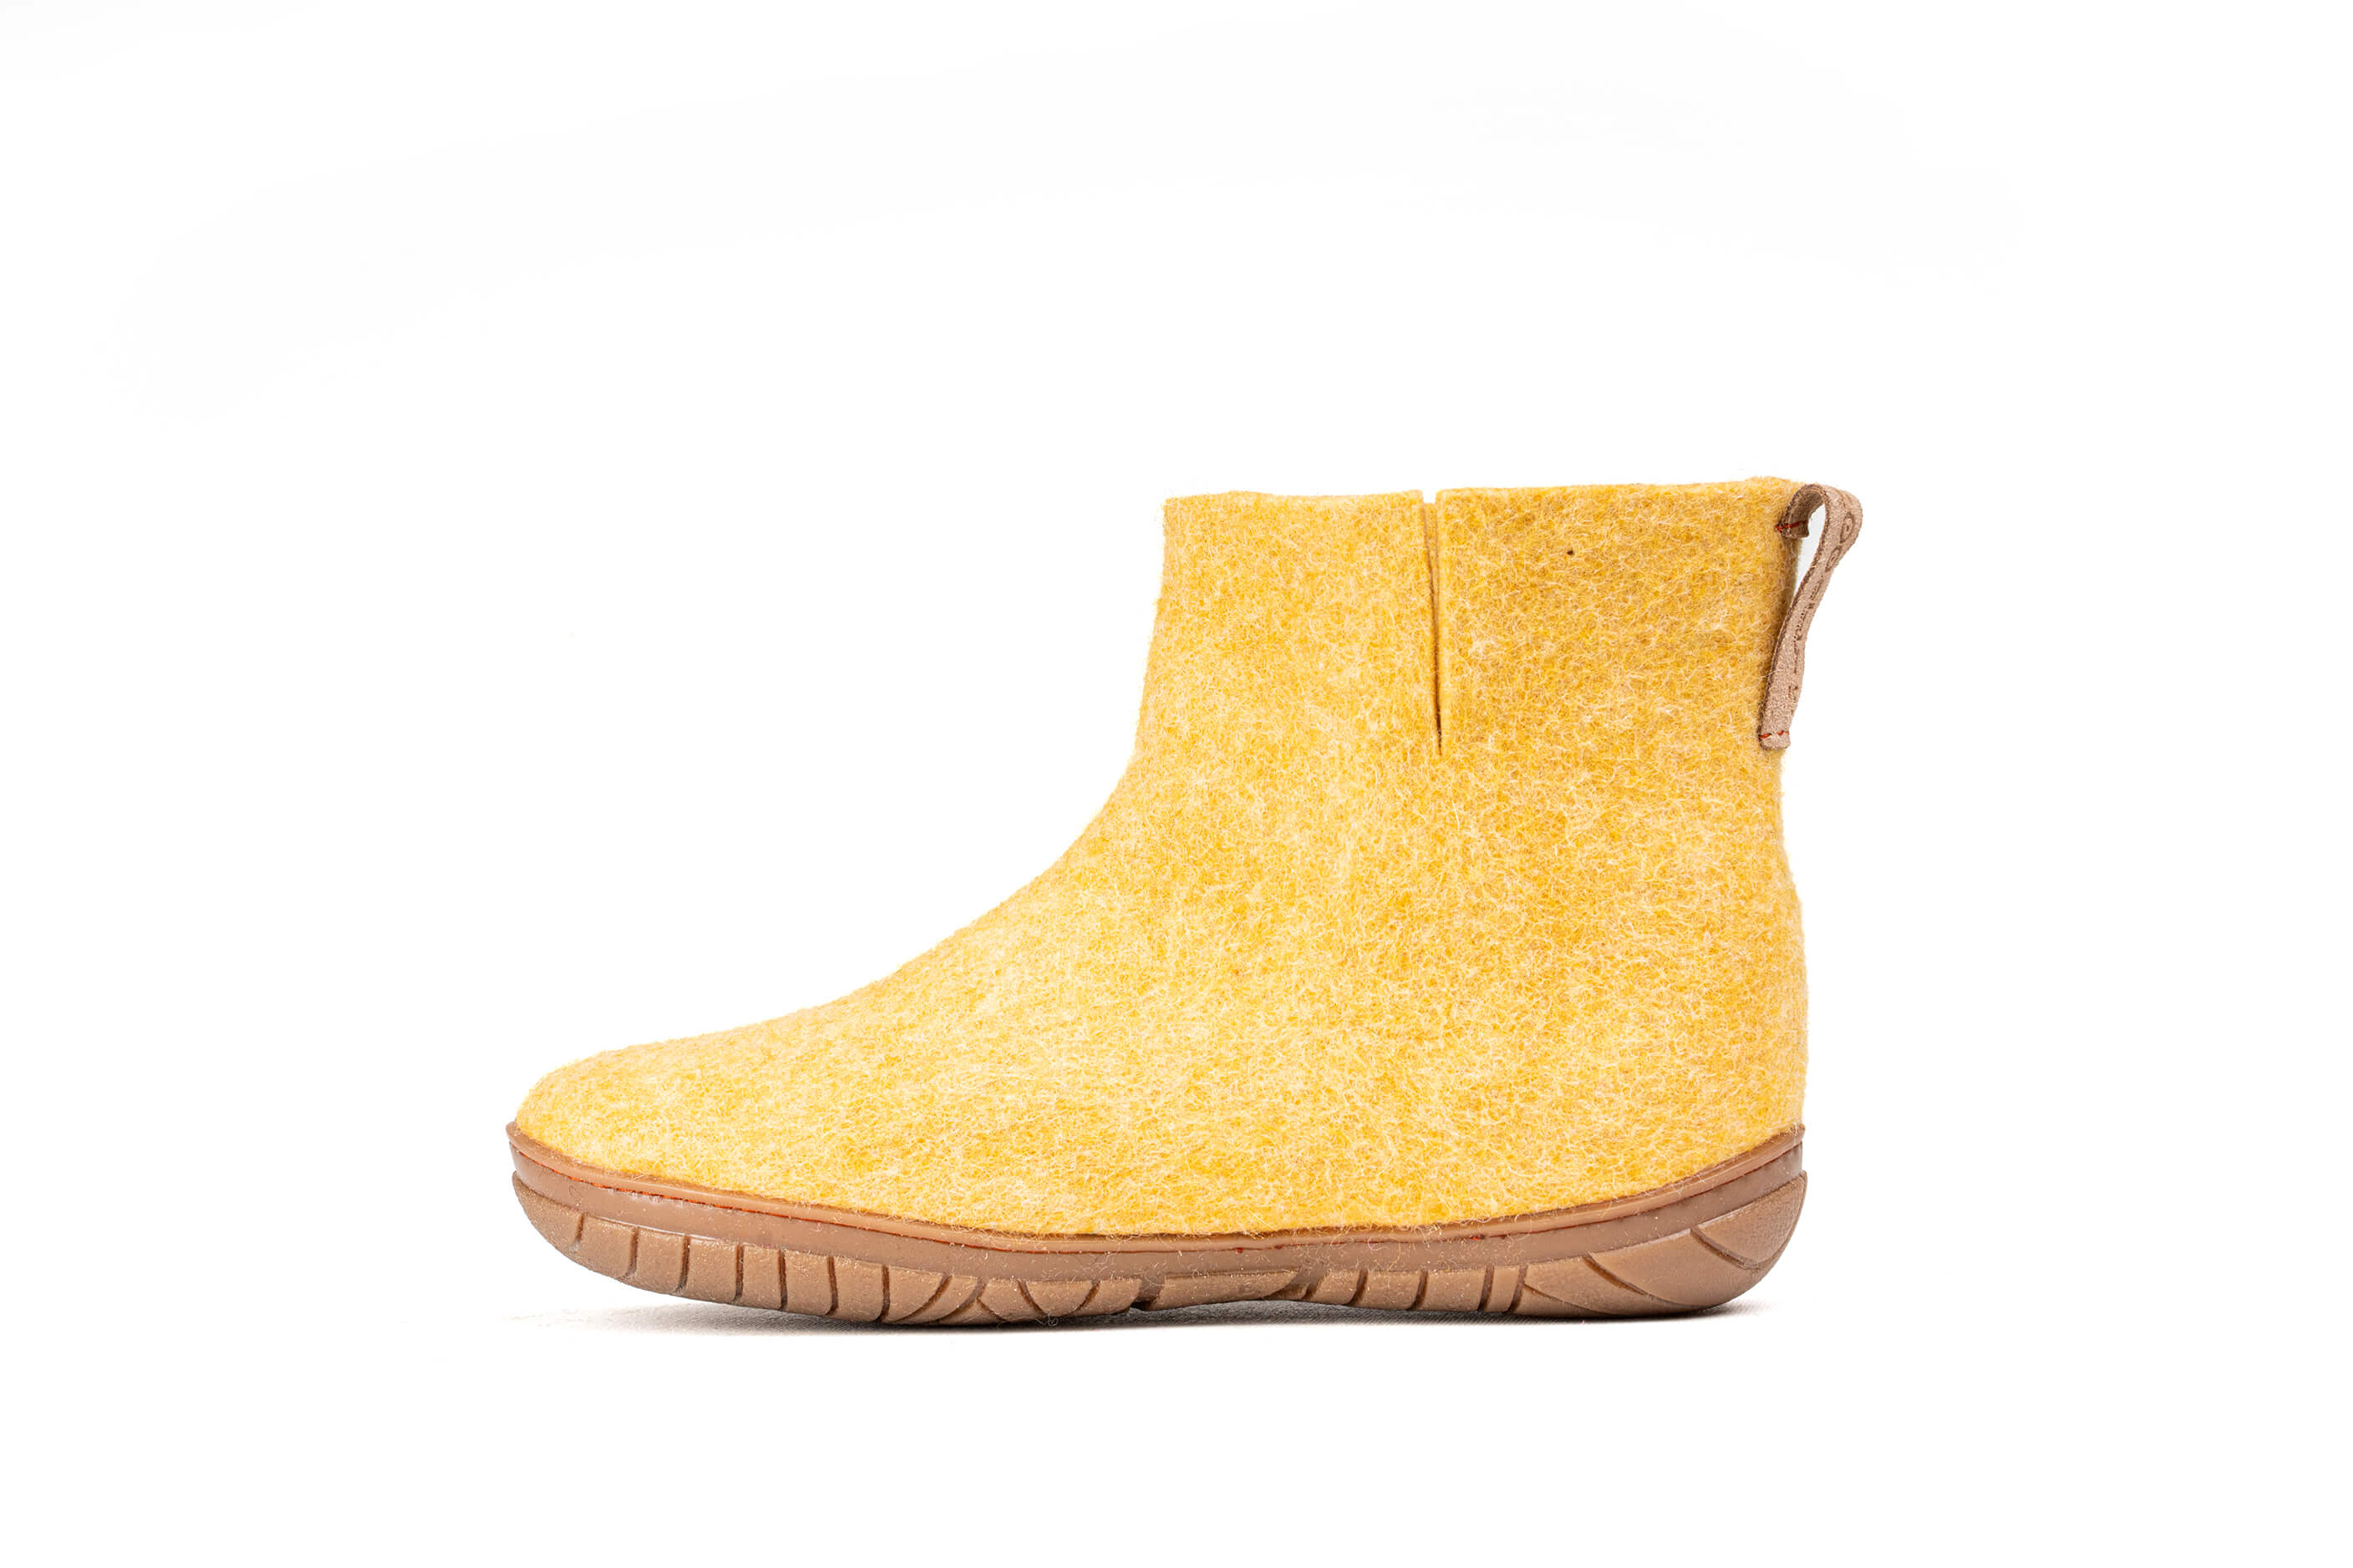 Outdoor Low Boots With Rubber Sole - Mustard